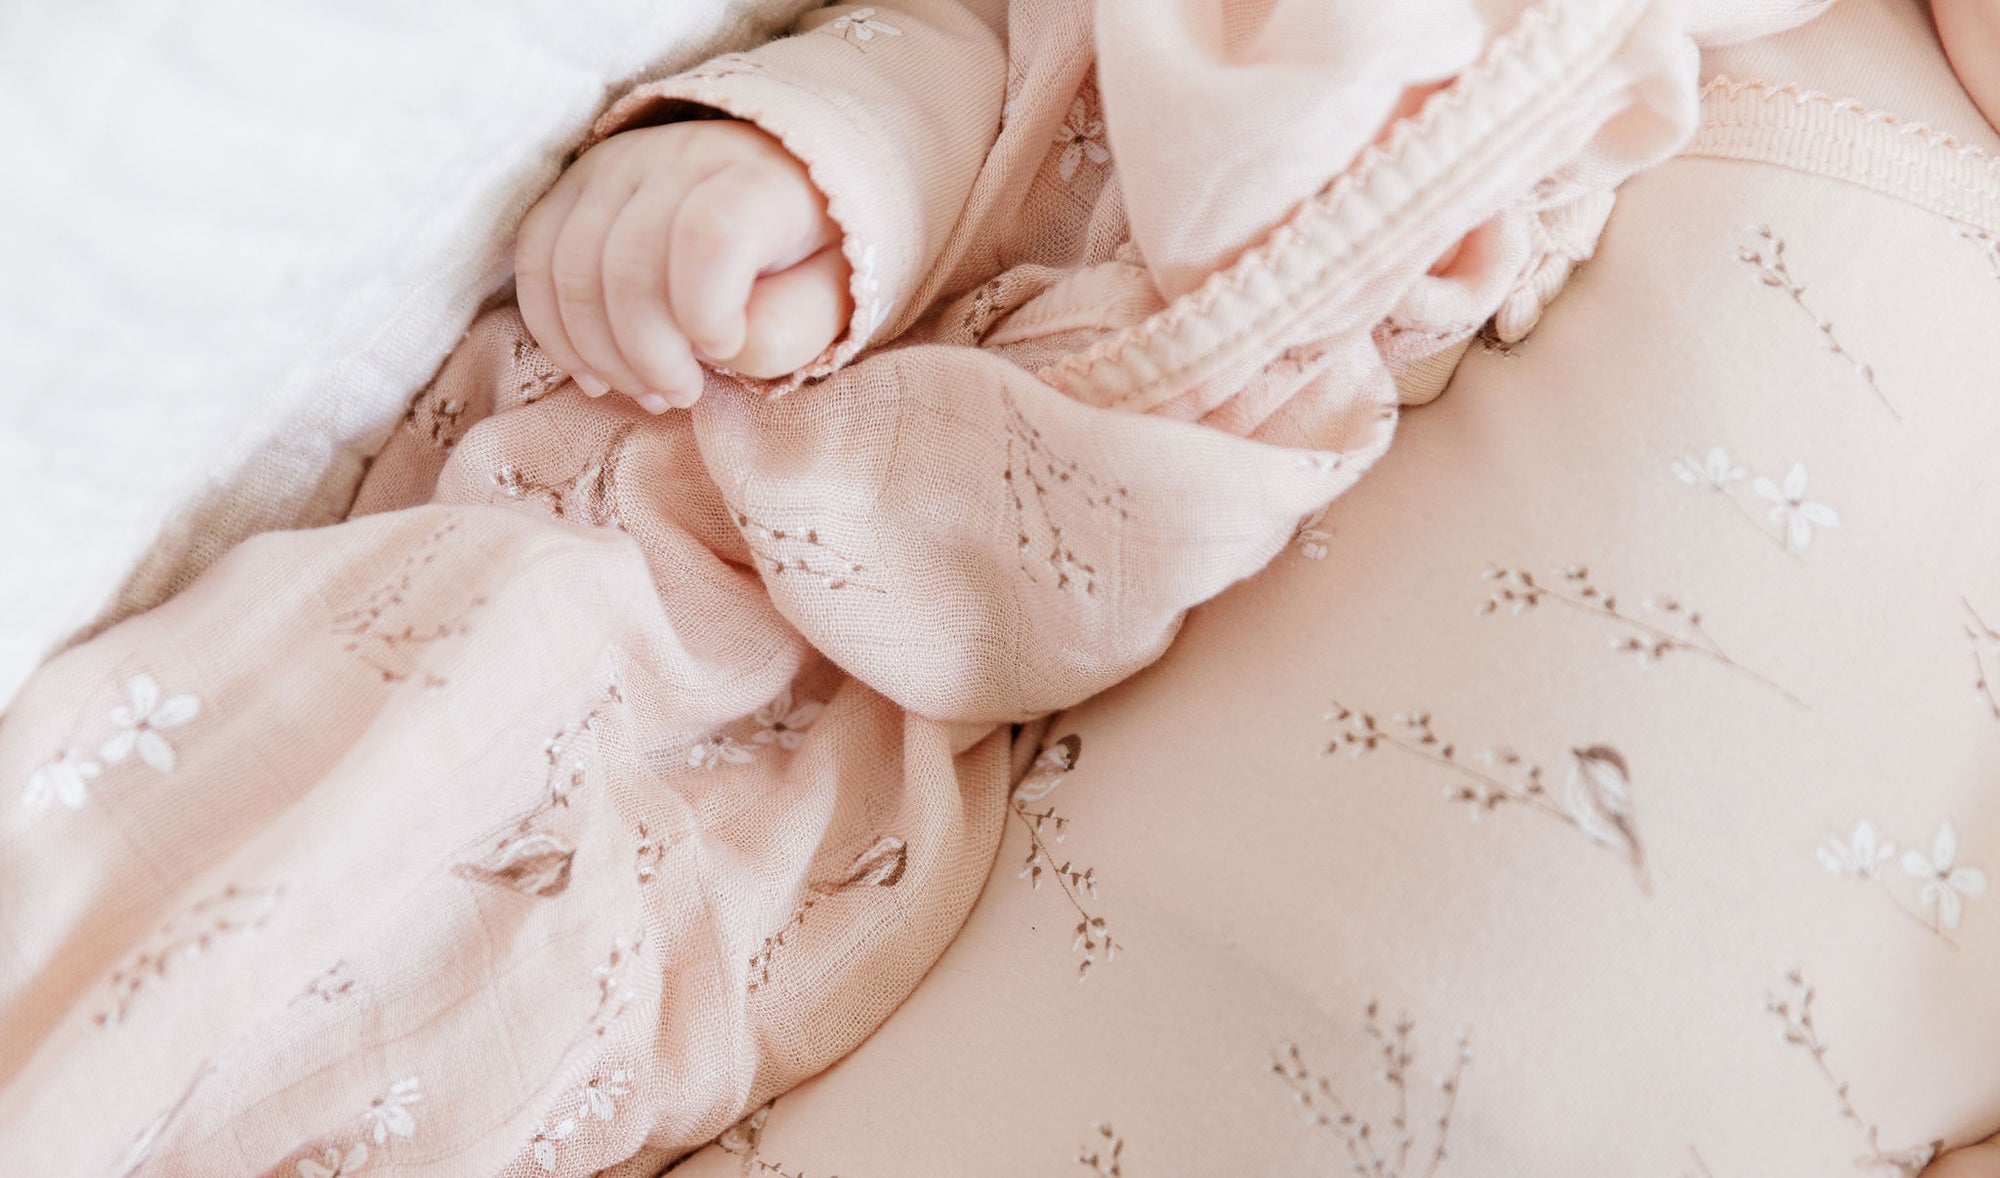 Jersey Cotton - Vintage Birds Collection - Bamboo Muslin Swaddle